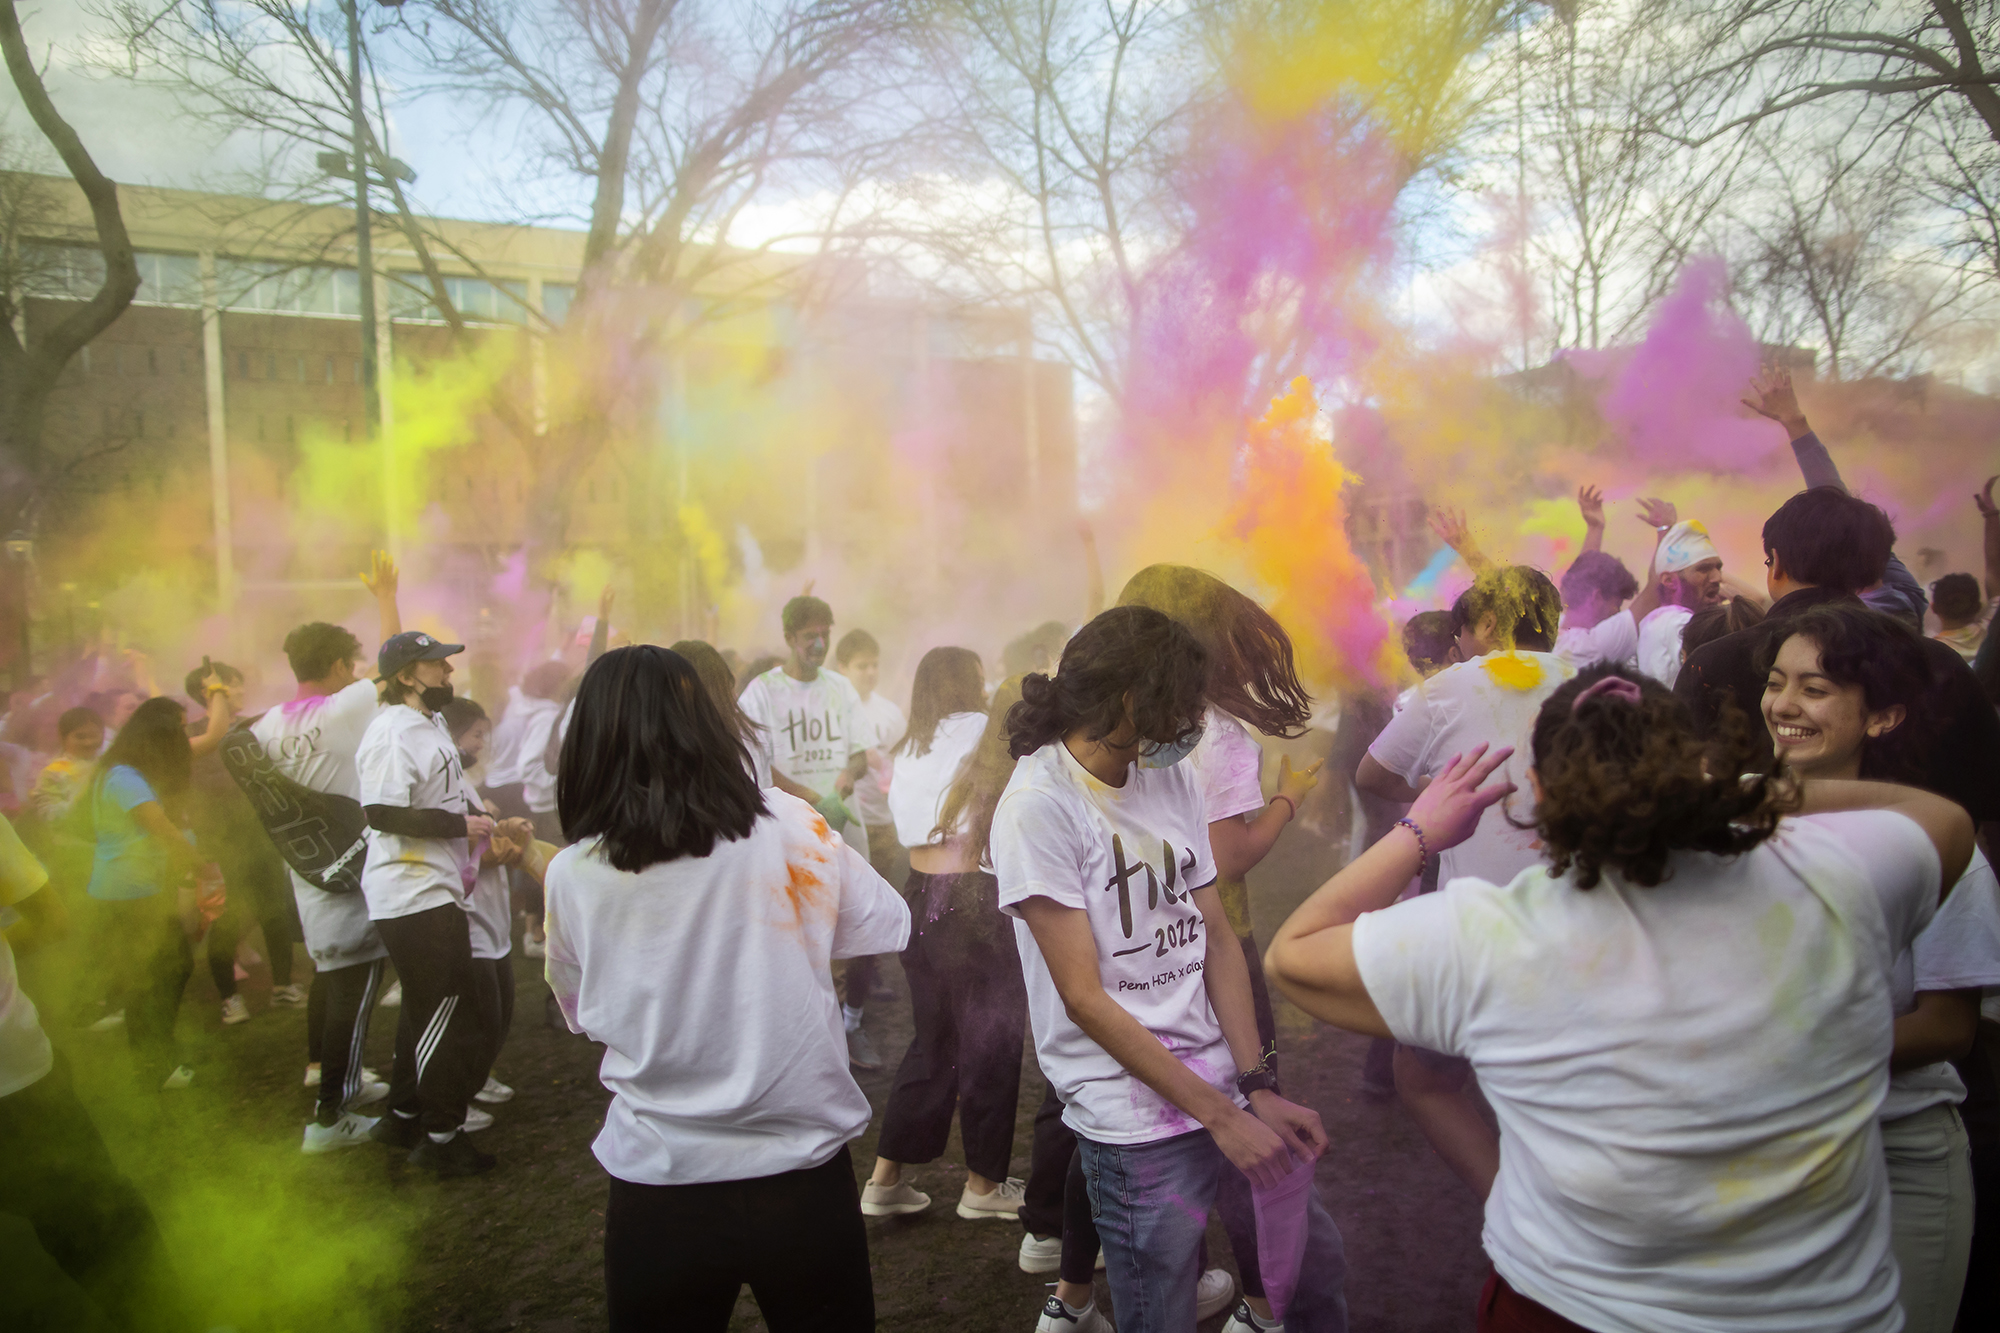 Students throw colorful powder into the air on College Green.